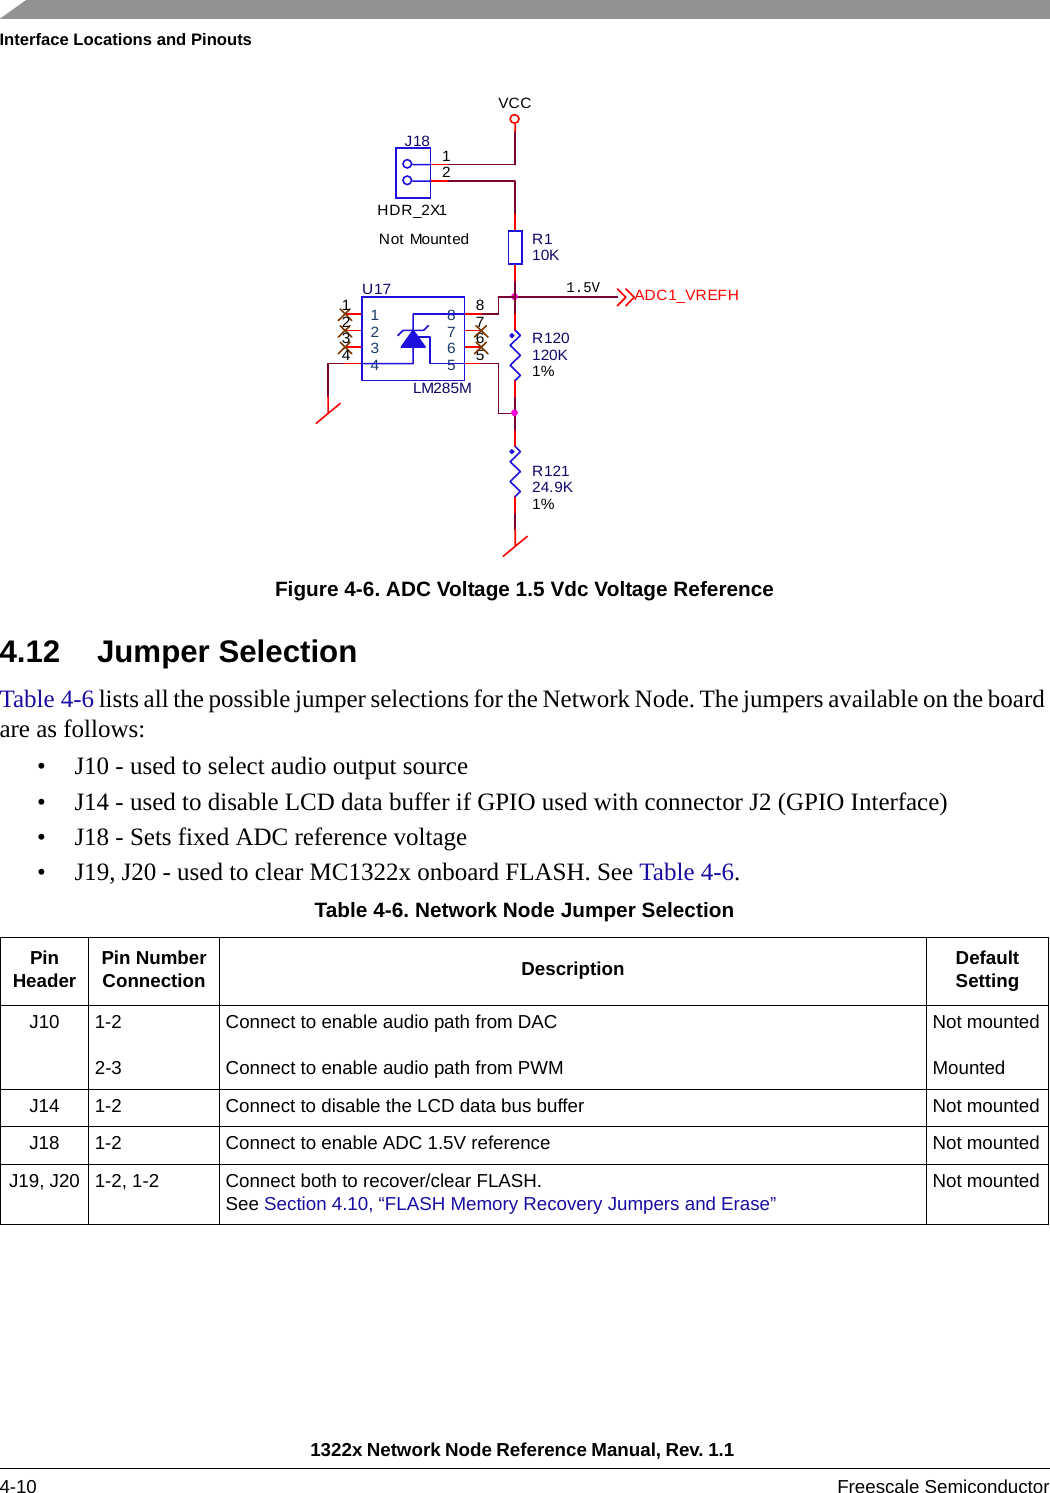 Interface Locations and Pinouts1322x Network Node Reference Manual, Rev. 1.1 4-10 Freescale SemiconductorFigure 4-6. ADC Voltage 1.5 Vdc Voltage Reference4.12 Jumper SelectionTable 4-6 lists all the possible jumper selections for the Network Node. The jumpers available on the board are as follows:• J10 - used to select audio output source• J14 - used to disable LCD data buffer if GPIO used with connector J2 (GPIO Interface)• J18 - Sets fixed ADC reference voltage• J19, J20 - used to clear MC1322x onboard FLASH. See Table 4-6.Table 4-6. Network Node Jumper SelectionPin Header Pin NumberConnection Description DefaultSettingJ10 1-22-3Connect to enable audio path from DACConnect to enable audio path from PWMNot mountedMountedJ14 1-2 Connect to disable the LCD data bus buffer Not mountedJ18 1-2  Connect to enable ADC 1.5V reference Not mountedJ19, J20 1-2, 1-2 Connect both to recover/clear FLASH. See Section 4.10, “FLASH Memory Recovery Jumpers and Erase”Not mounted 1.5VR110K1122334455667788U17LM285MR12124.9K1%R120120K1%12J18HDR_2X1Not MountedVCCADC1_VREFH